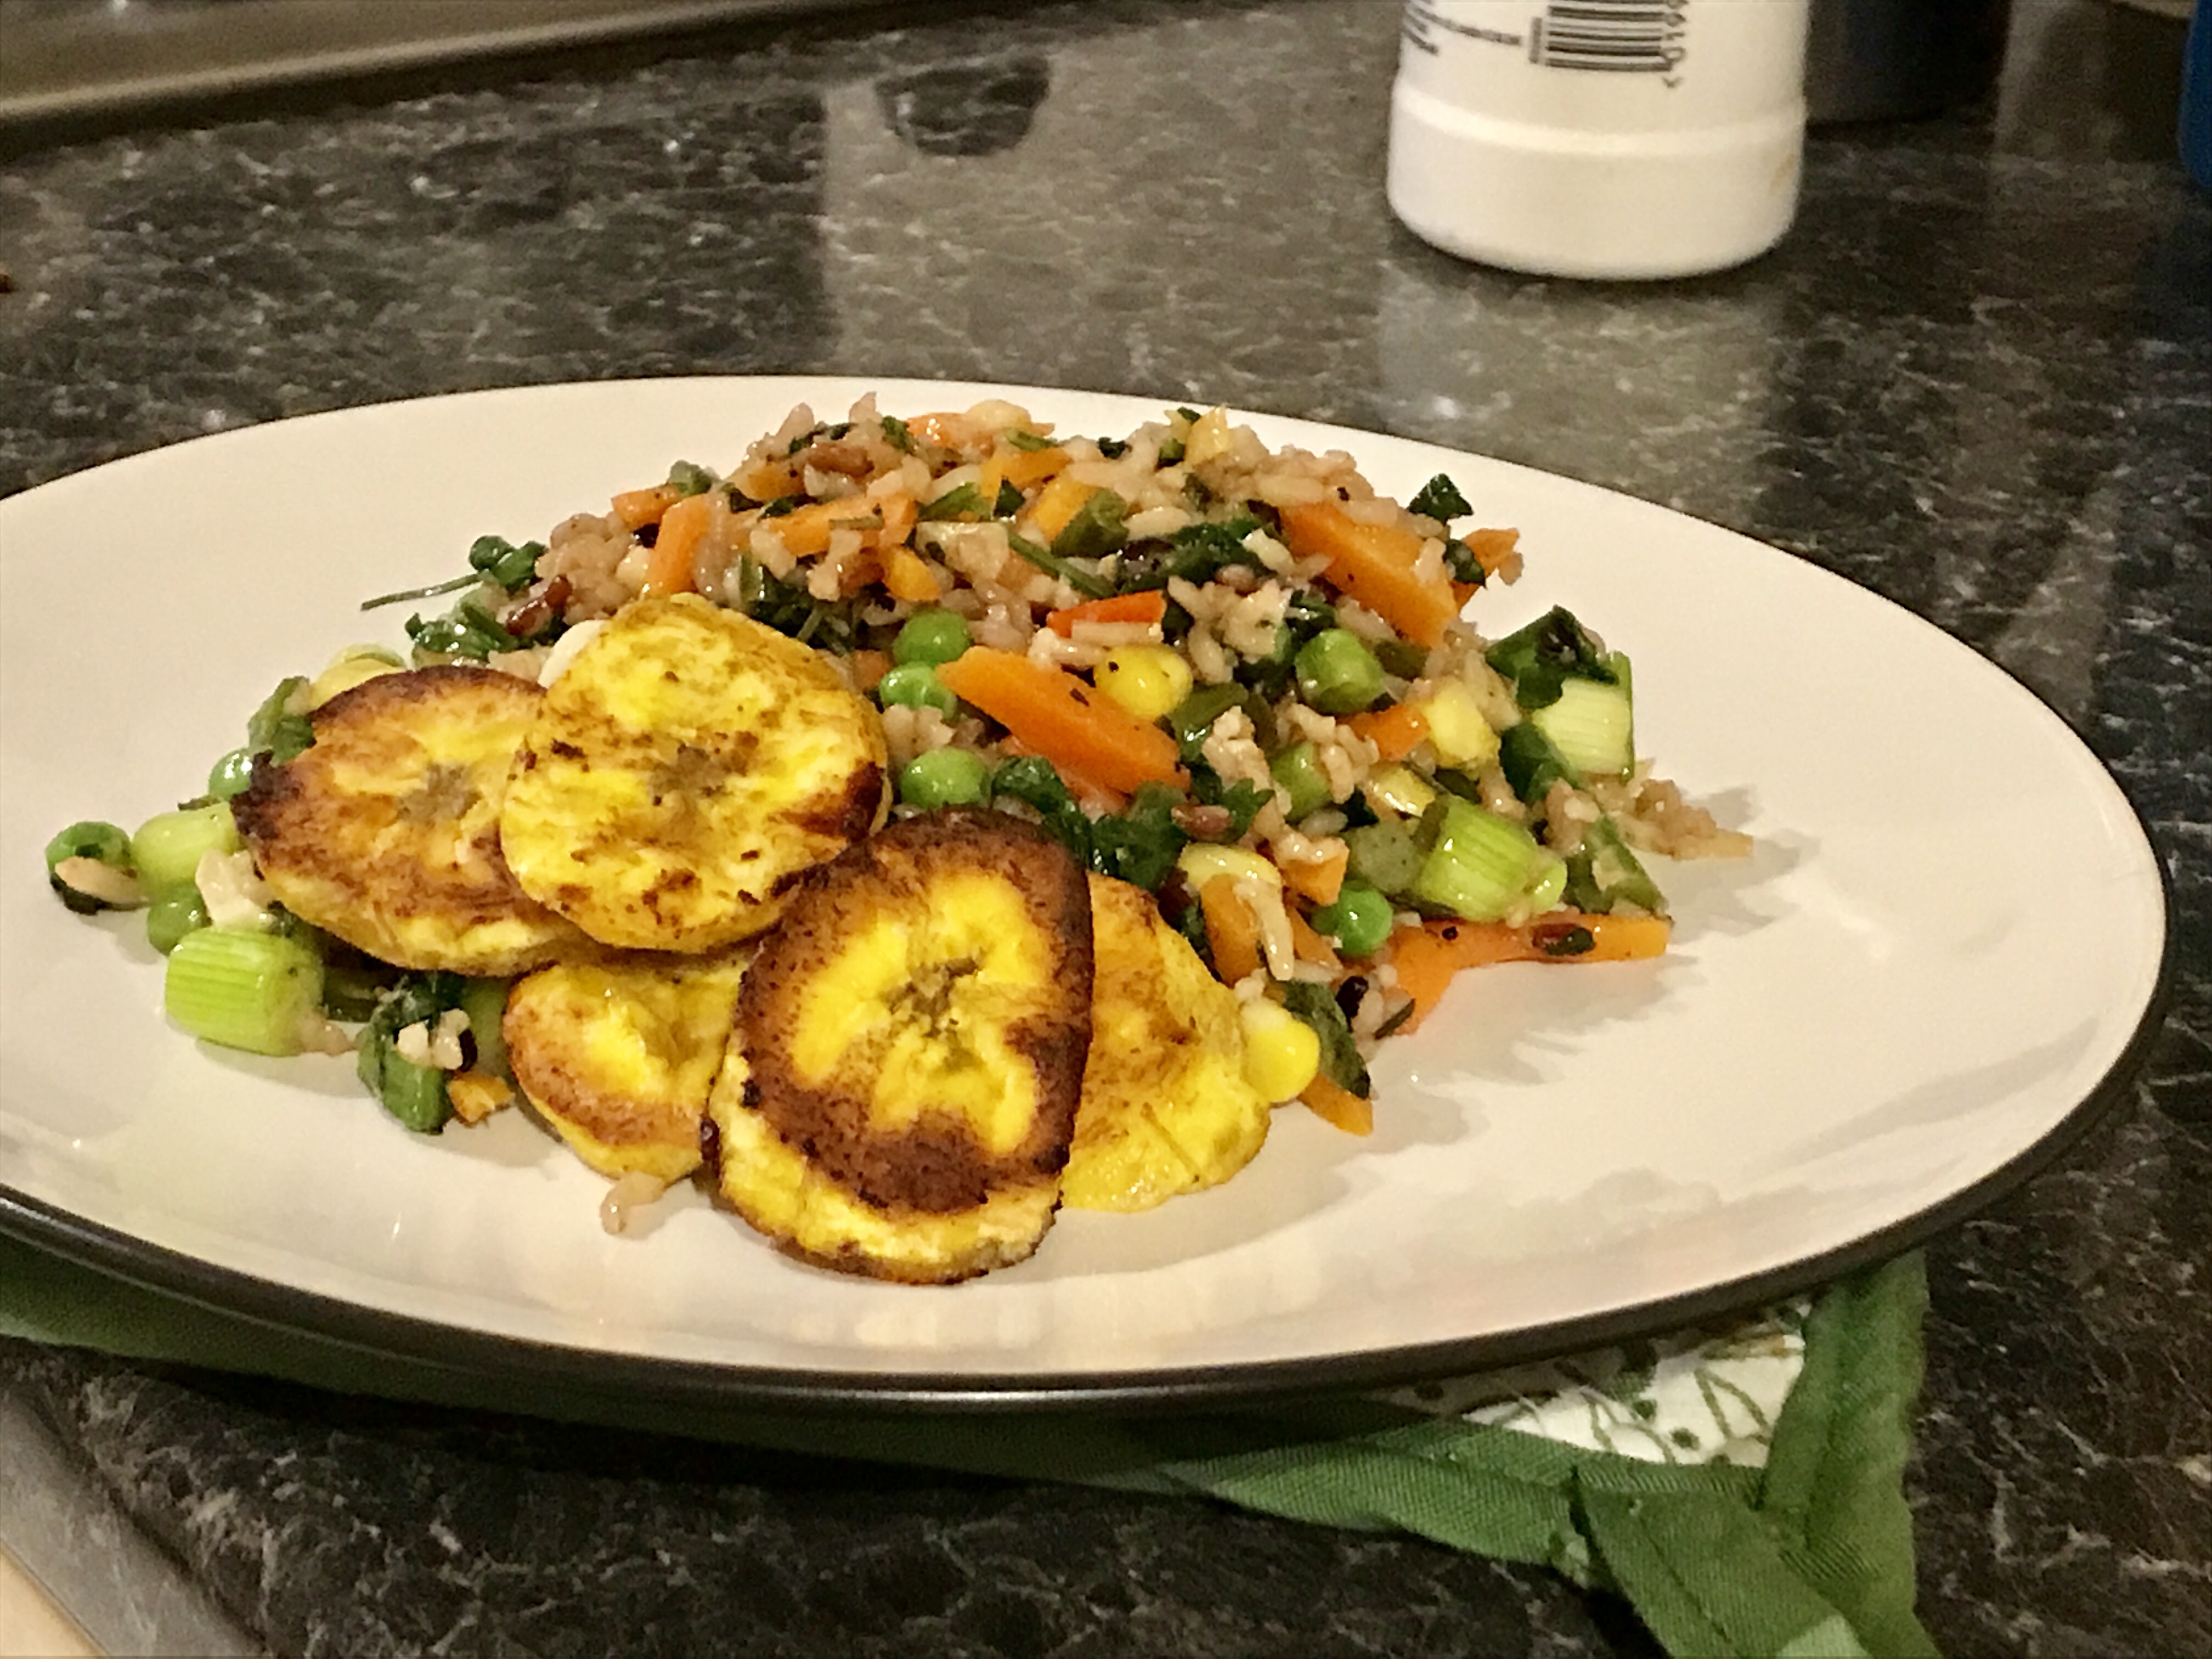 Latin American mixed rice salad with plantains